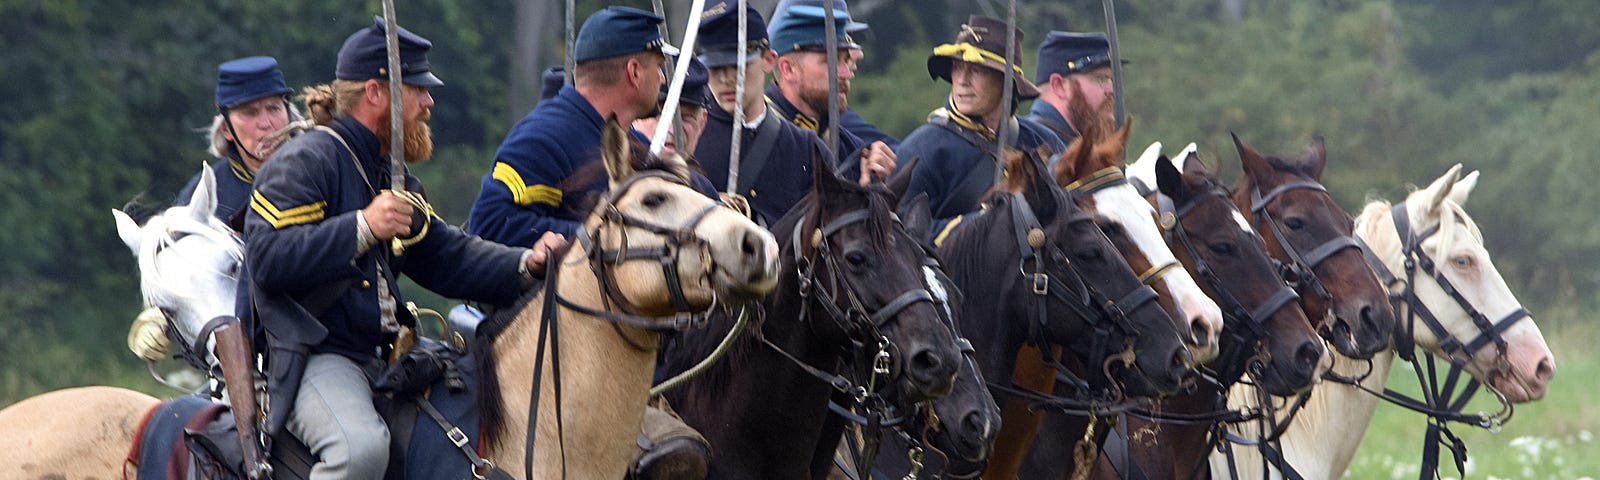 Union Soldiers in line prepared for battle